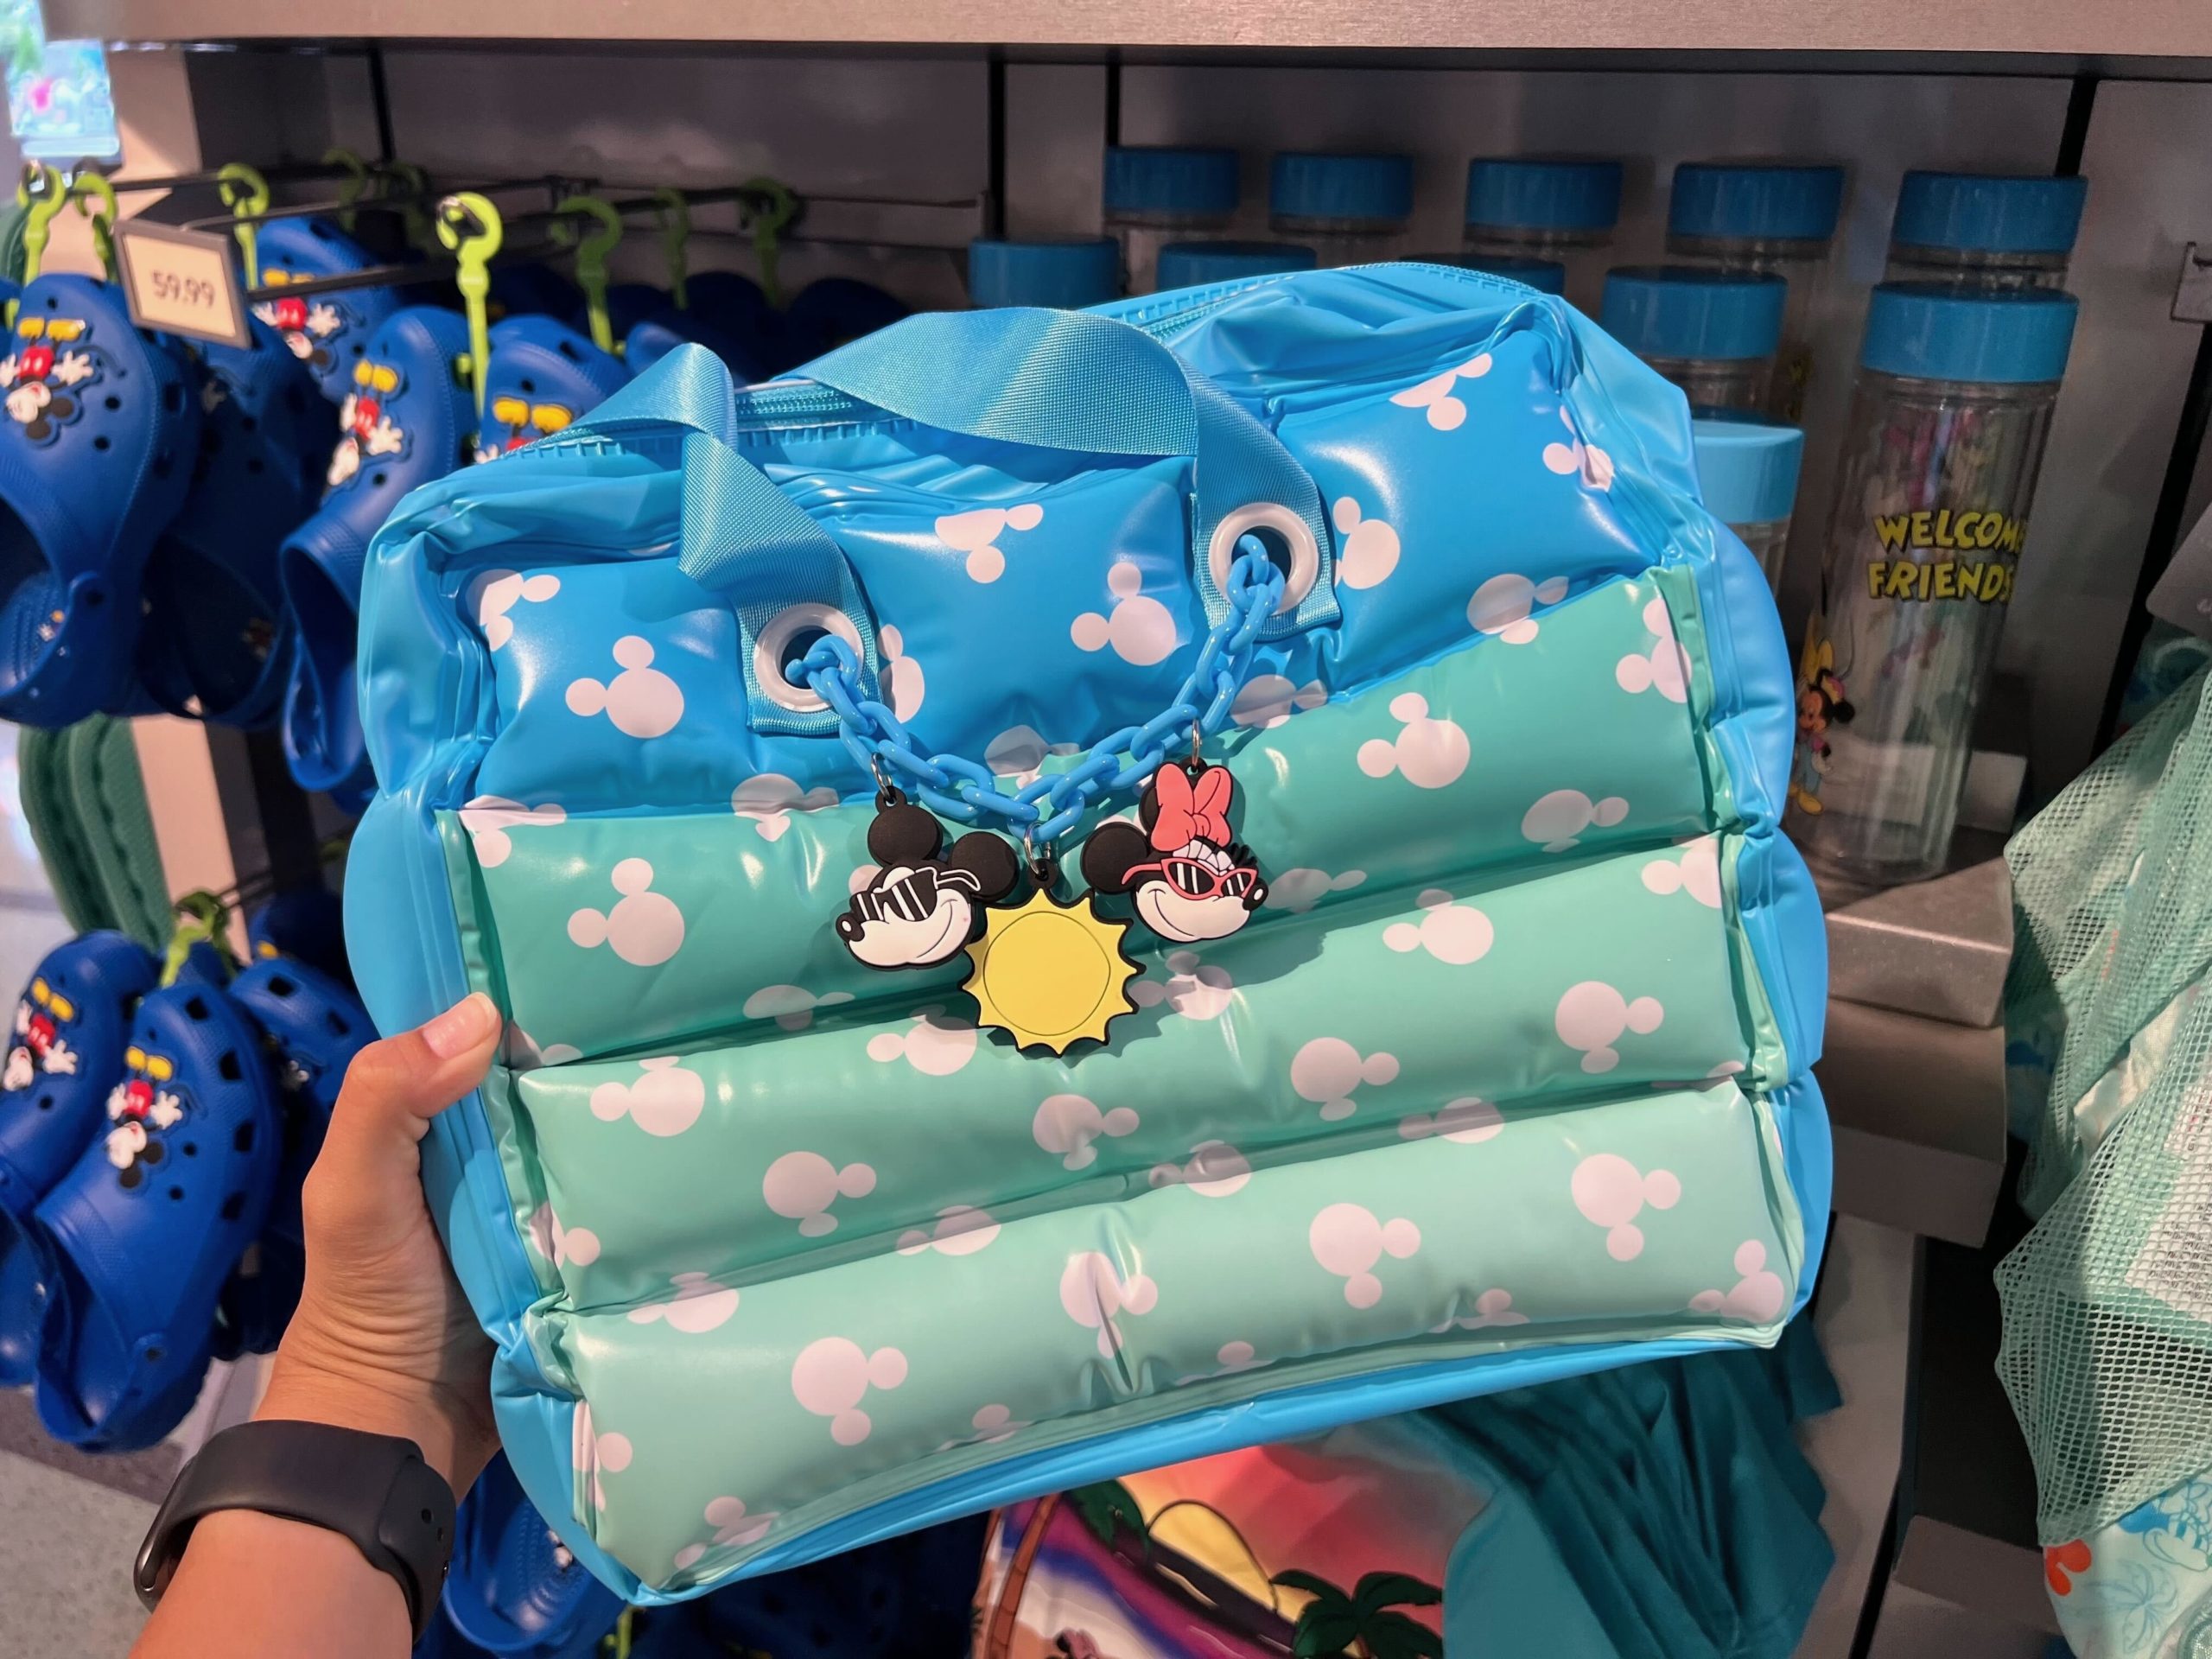 Inflatable Mickey and Minnie Bag at Star Traders in Magic Kingdom